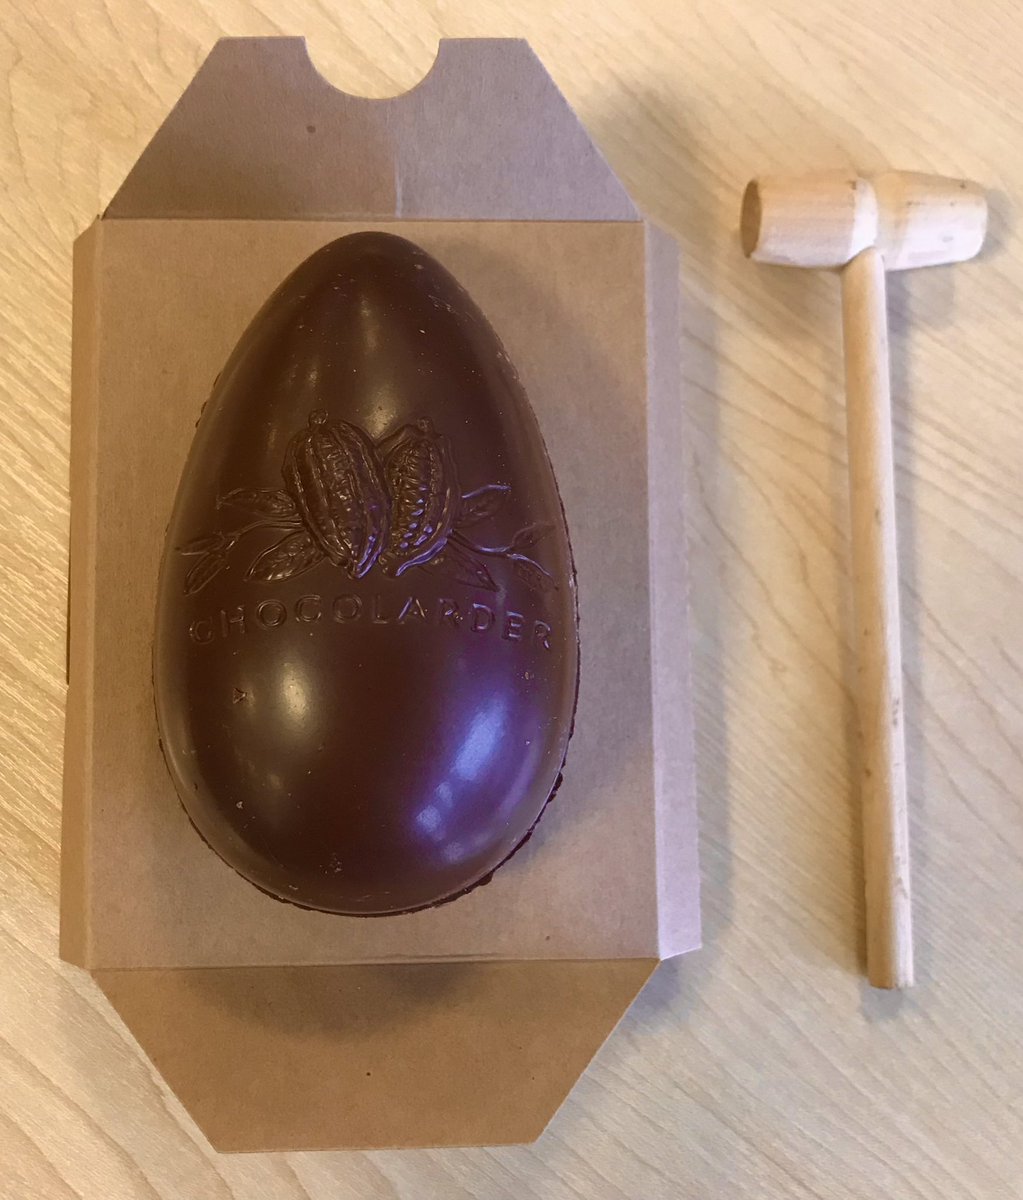 This beautiful egg, from @chocolarder of Cornwall, combines dark milk choc with fragrant hot cross bun crumb and is deeply, deeply delicious. Moments after the ceremonial chocolate hammer had been wielded, every scrap was gone